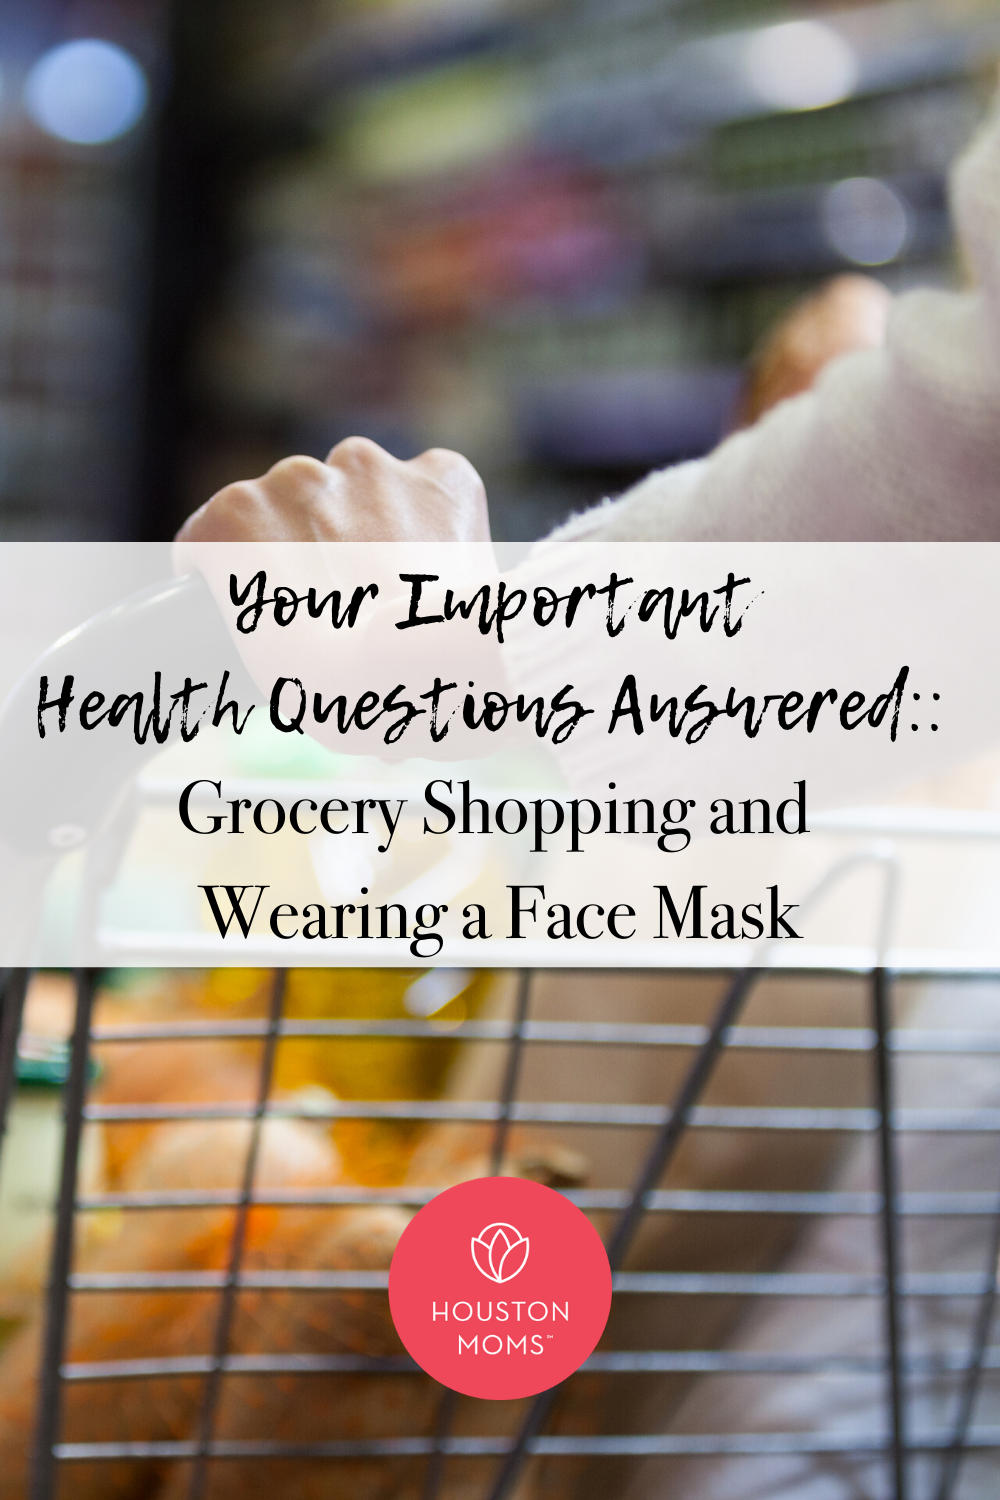 Houston Moms "Your Important Health Questions Answered:: Grocery Shopping and Wearing a Face Mask" #houstonmoms #houstonmomsblog #momsaroundhouston